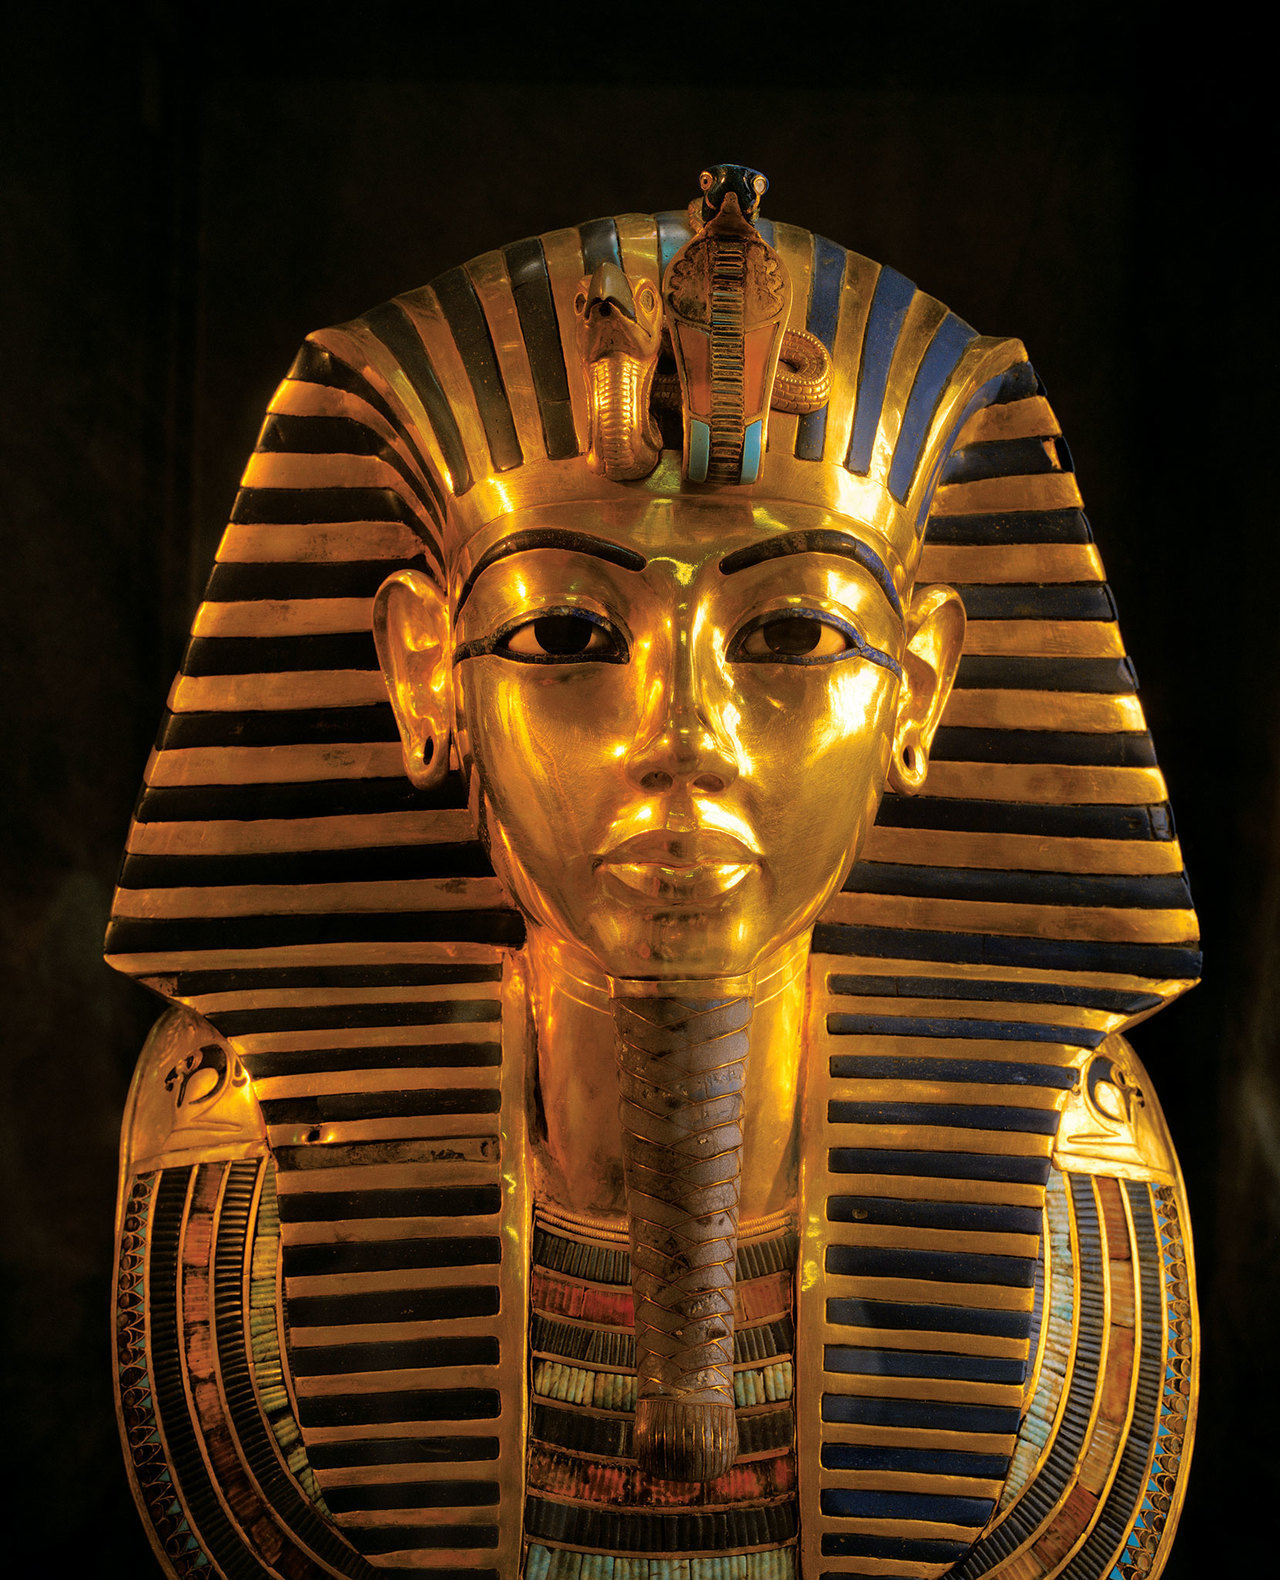 Gold Mask of TutankhamunProbably the most famous artifact in the world, the 11 kg death mask of pharaoh Tutankhamun was restored in 2015. The work is more than just the careful repair of a 3300 year old death mask.In August 2014, cleaning staff in...